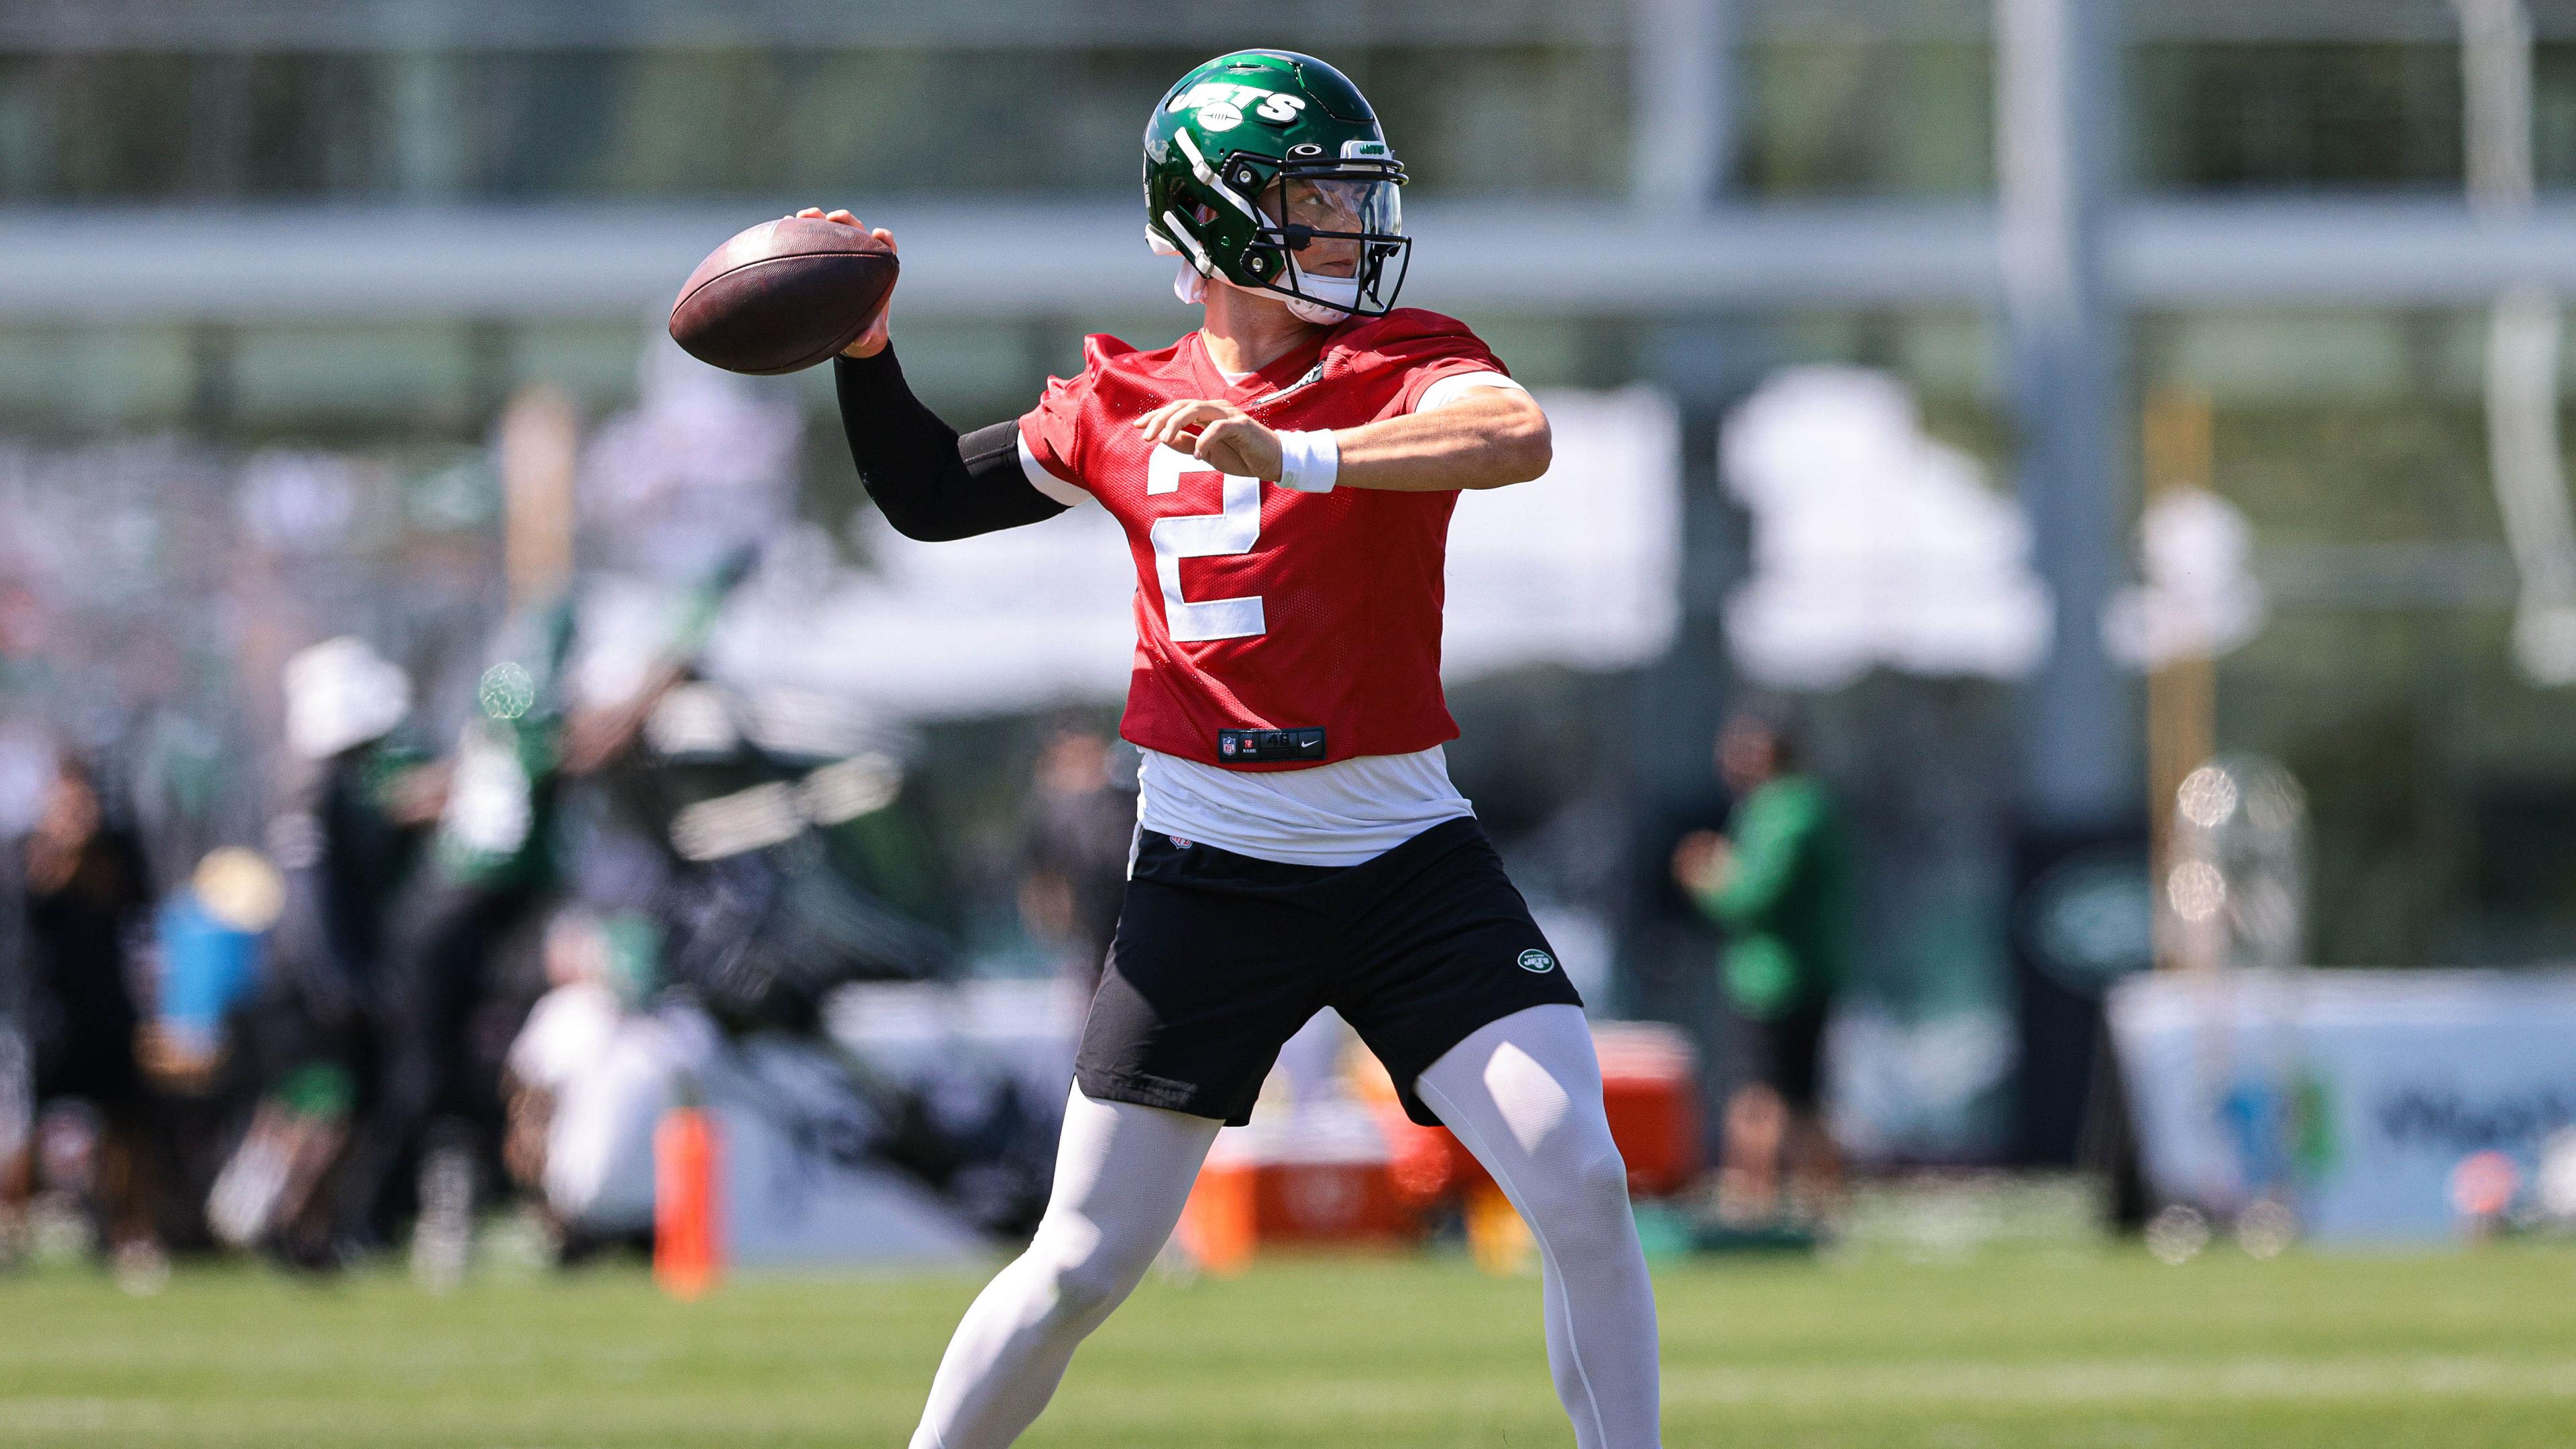 New York Jets quarterback Zach Wilson (2) throws the ball during training camp at Atlantic Health Jets Training Center. / Vincent Carchietta-USA TODAY Sports